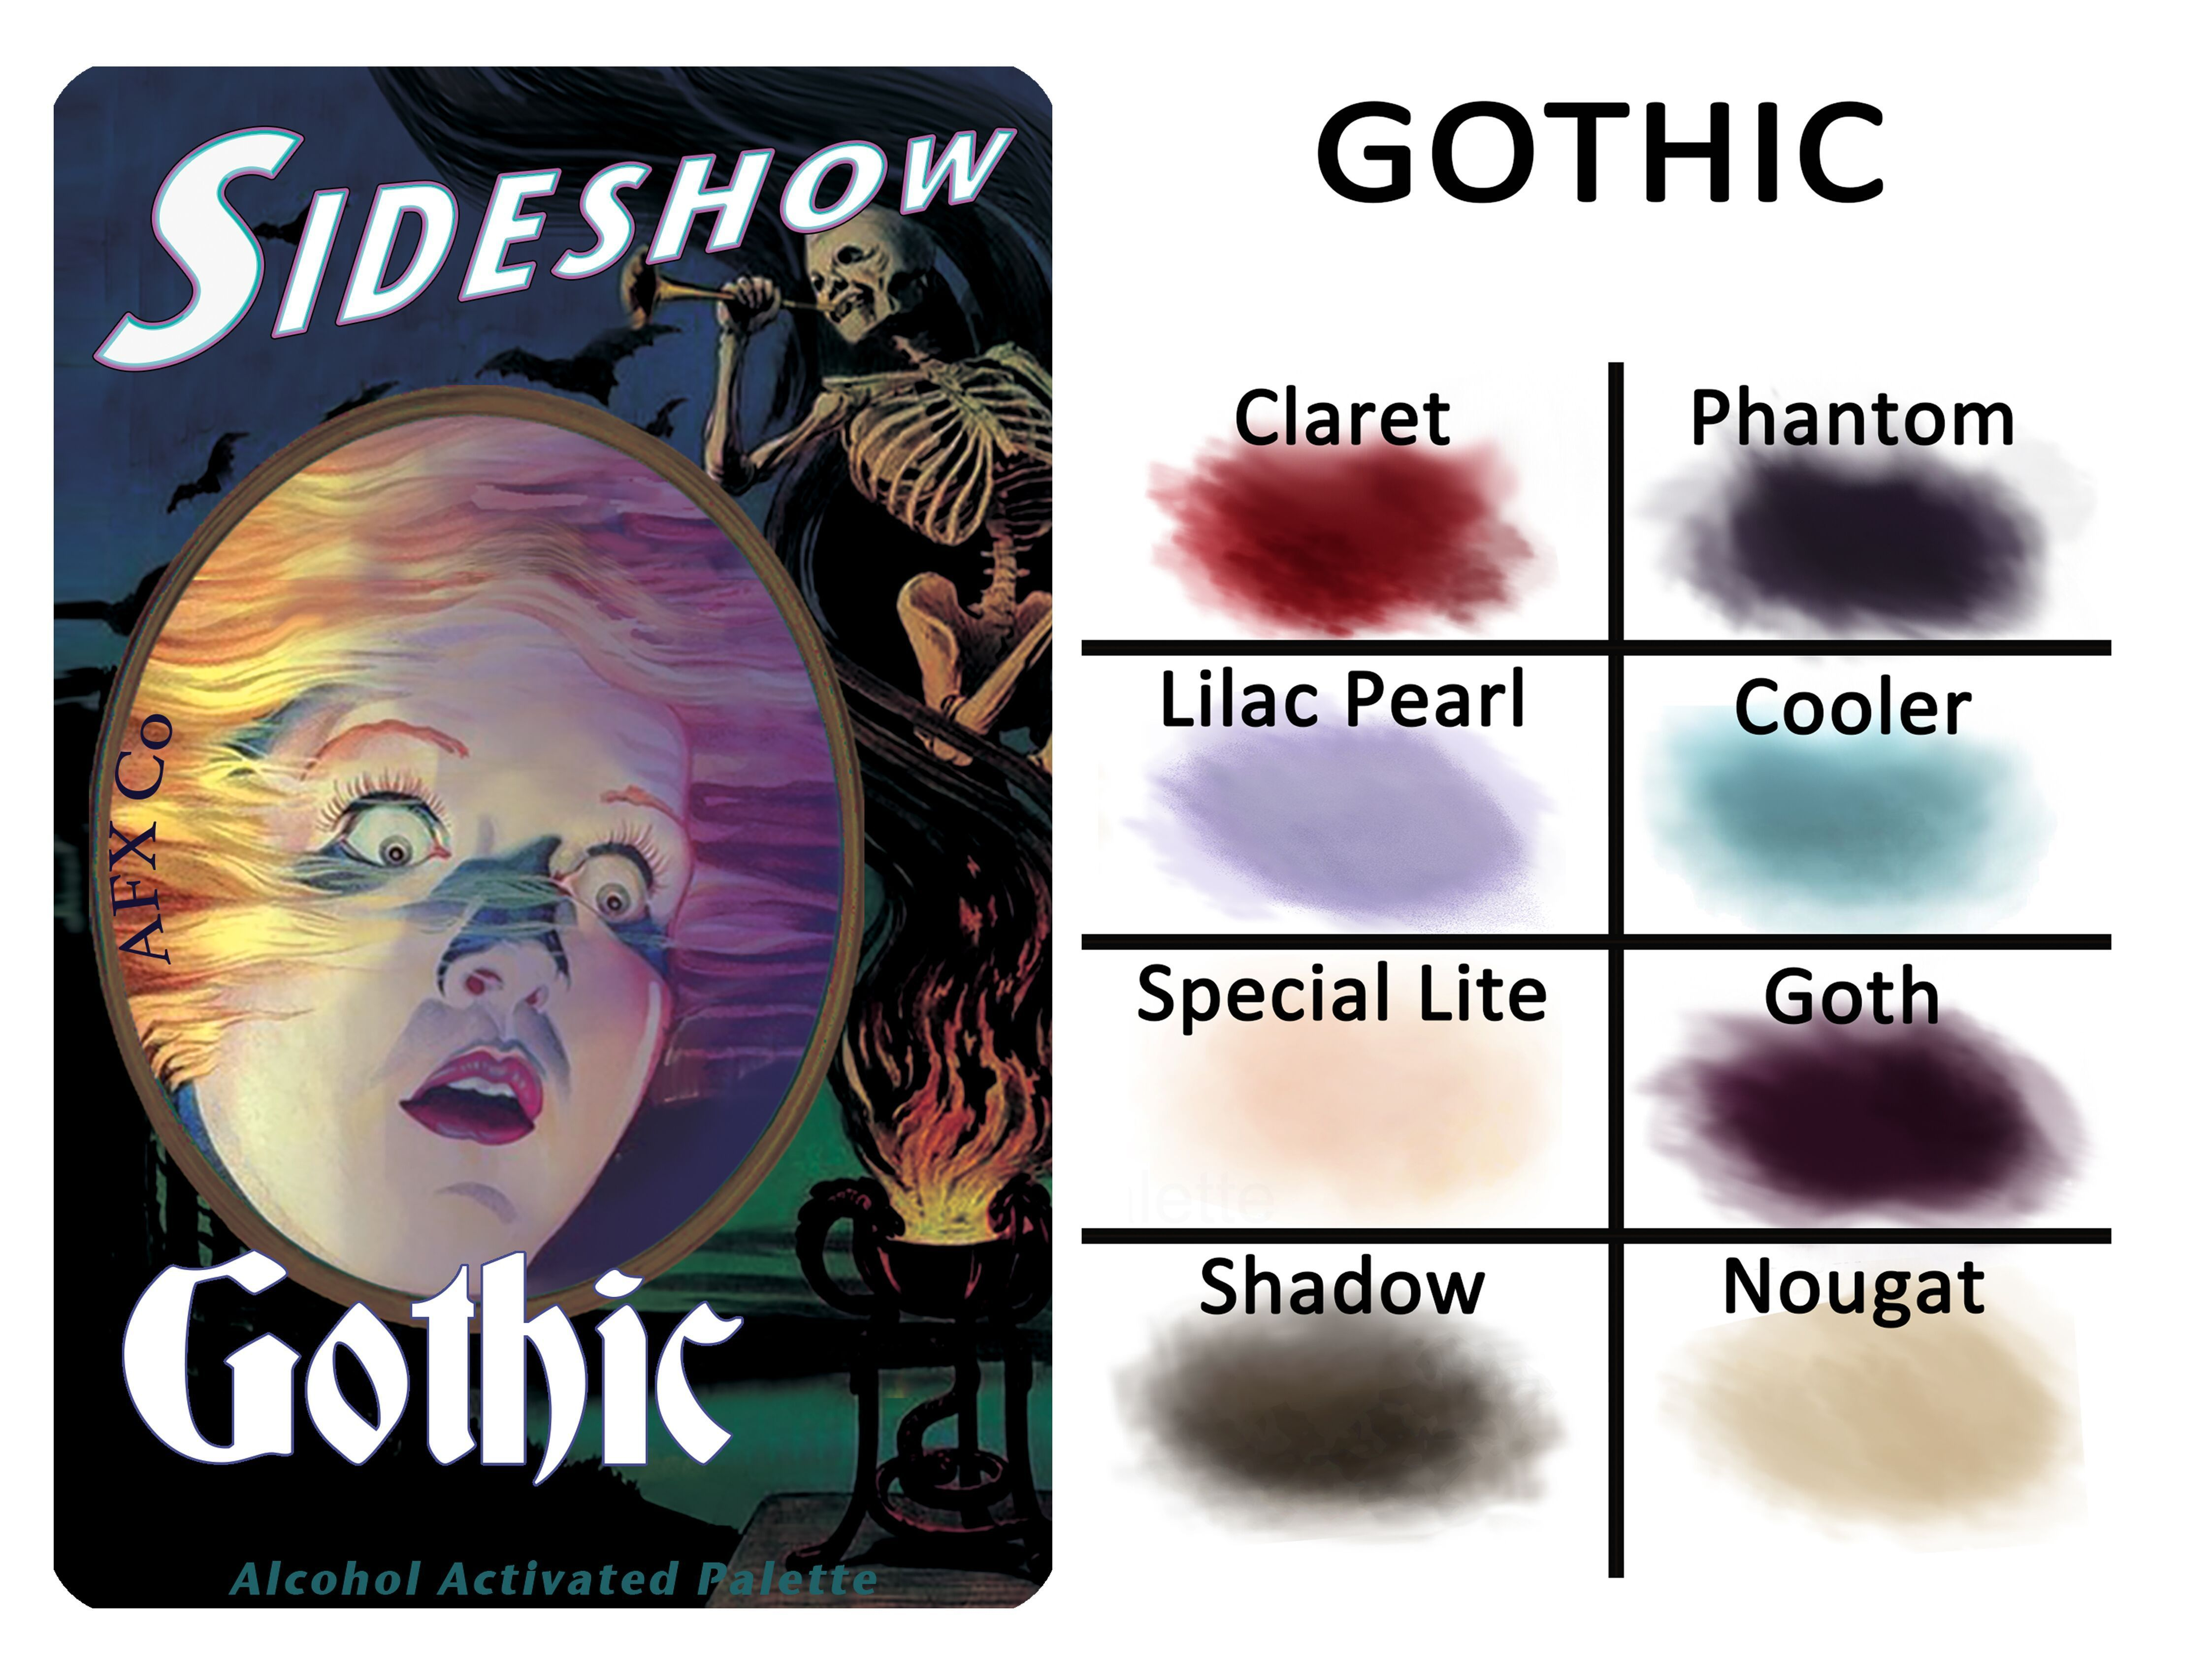 Sideshow Alcohol Activated Makeup Palette Gothic